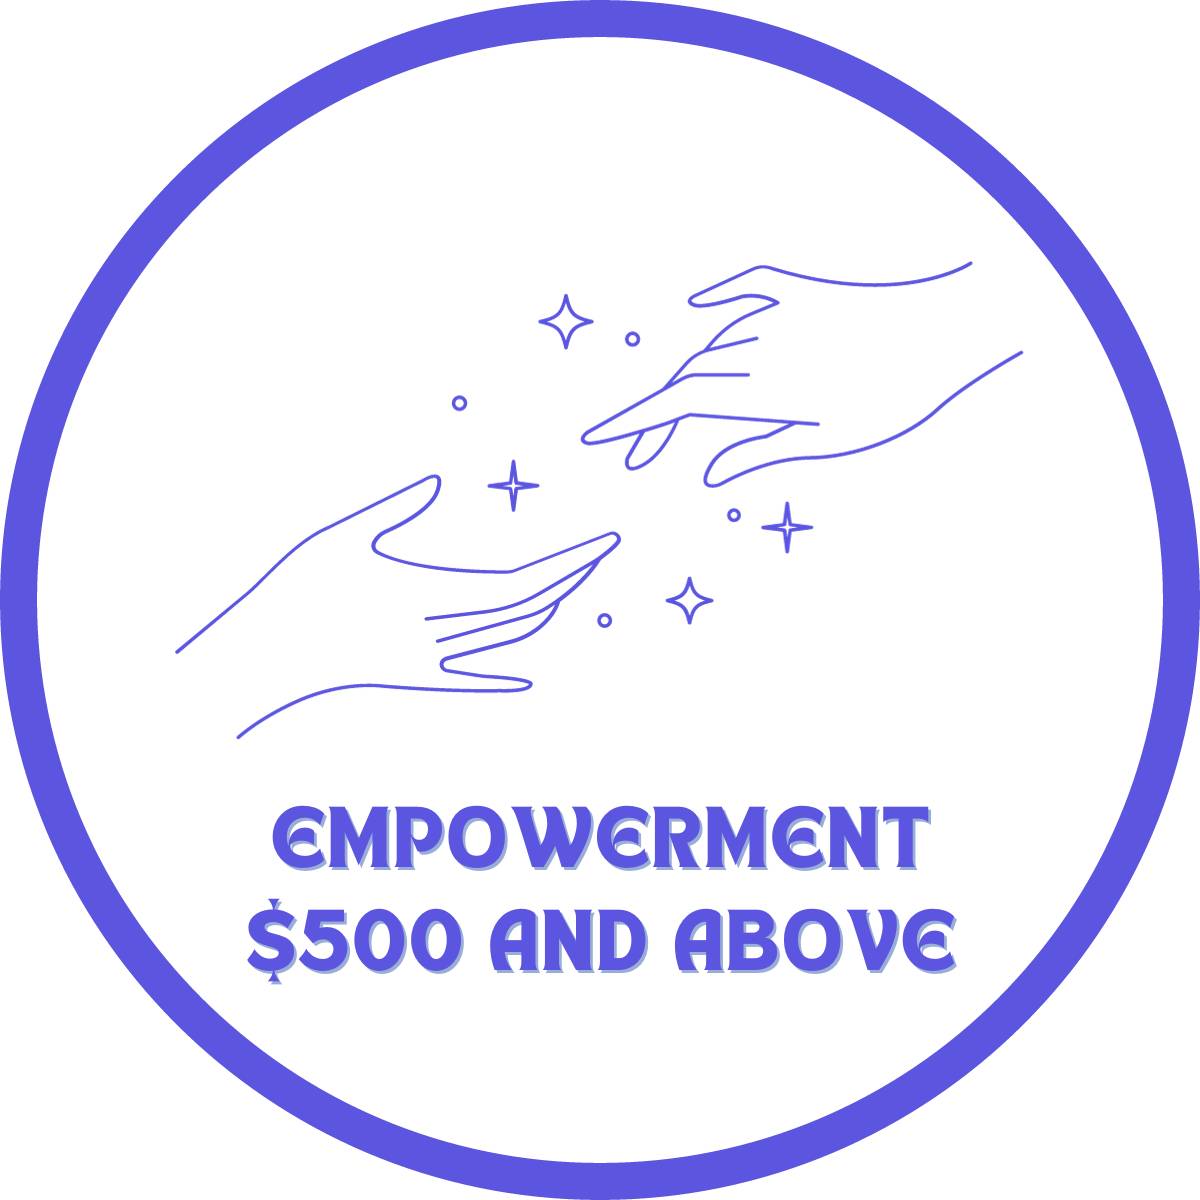 Empowerment level sponsor: $500 and above